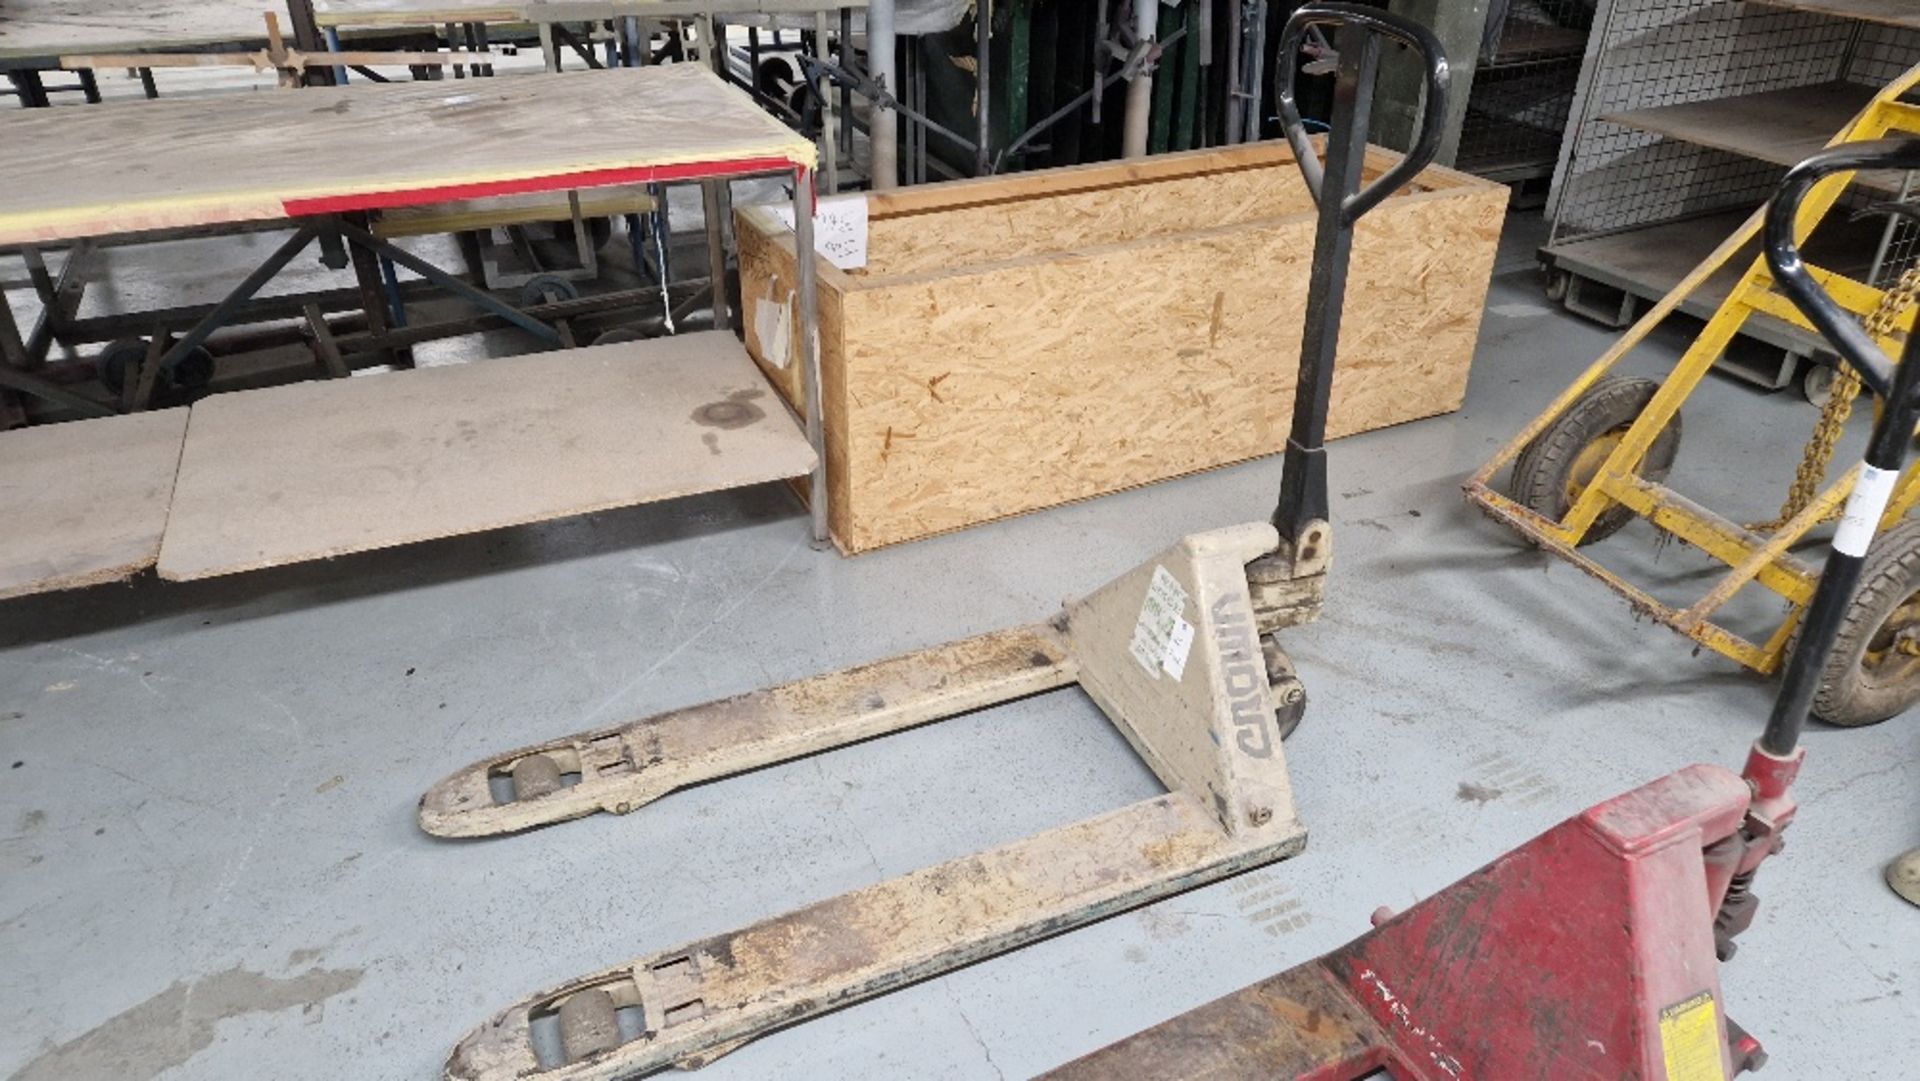 CROWN PALLET TRUCK *** PLEASE NOTE THIS ASSET IS LOCATED IN COVENTRY - CV7 *** ACCESS WILL BE